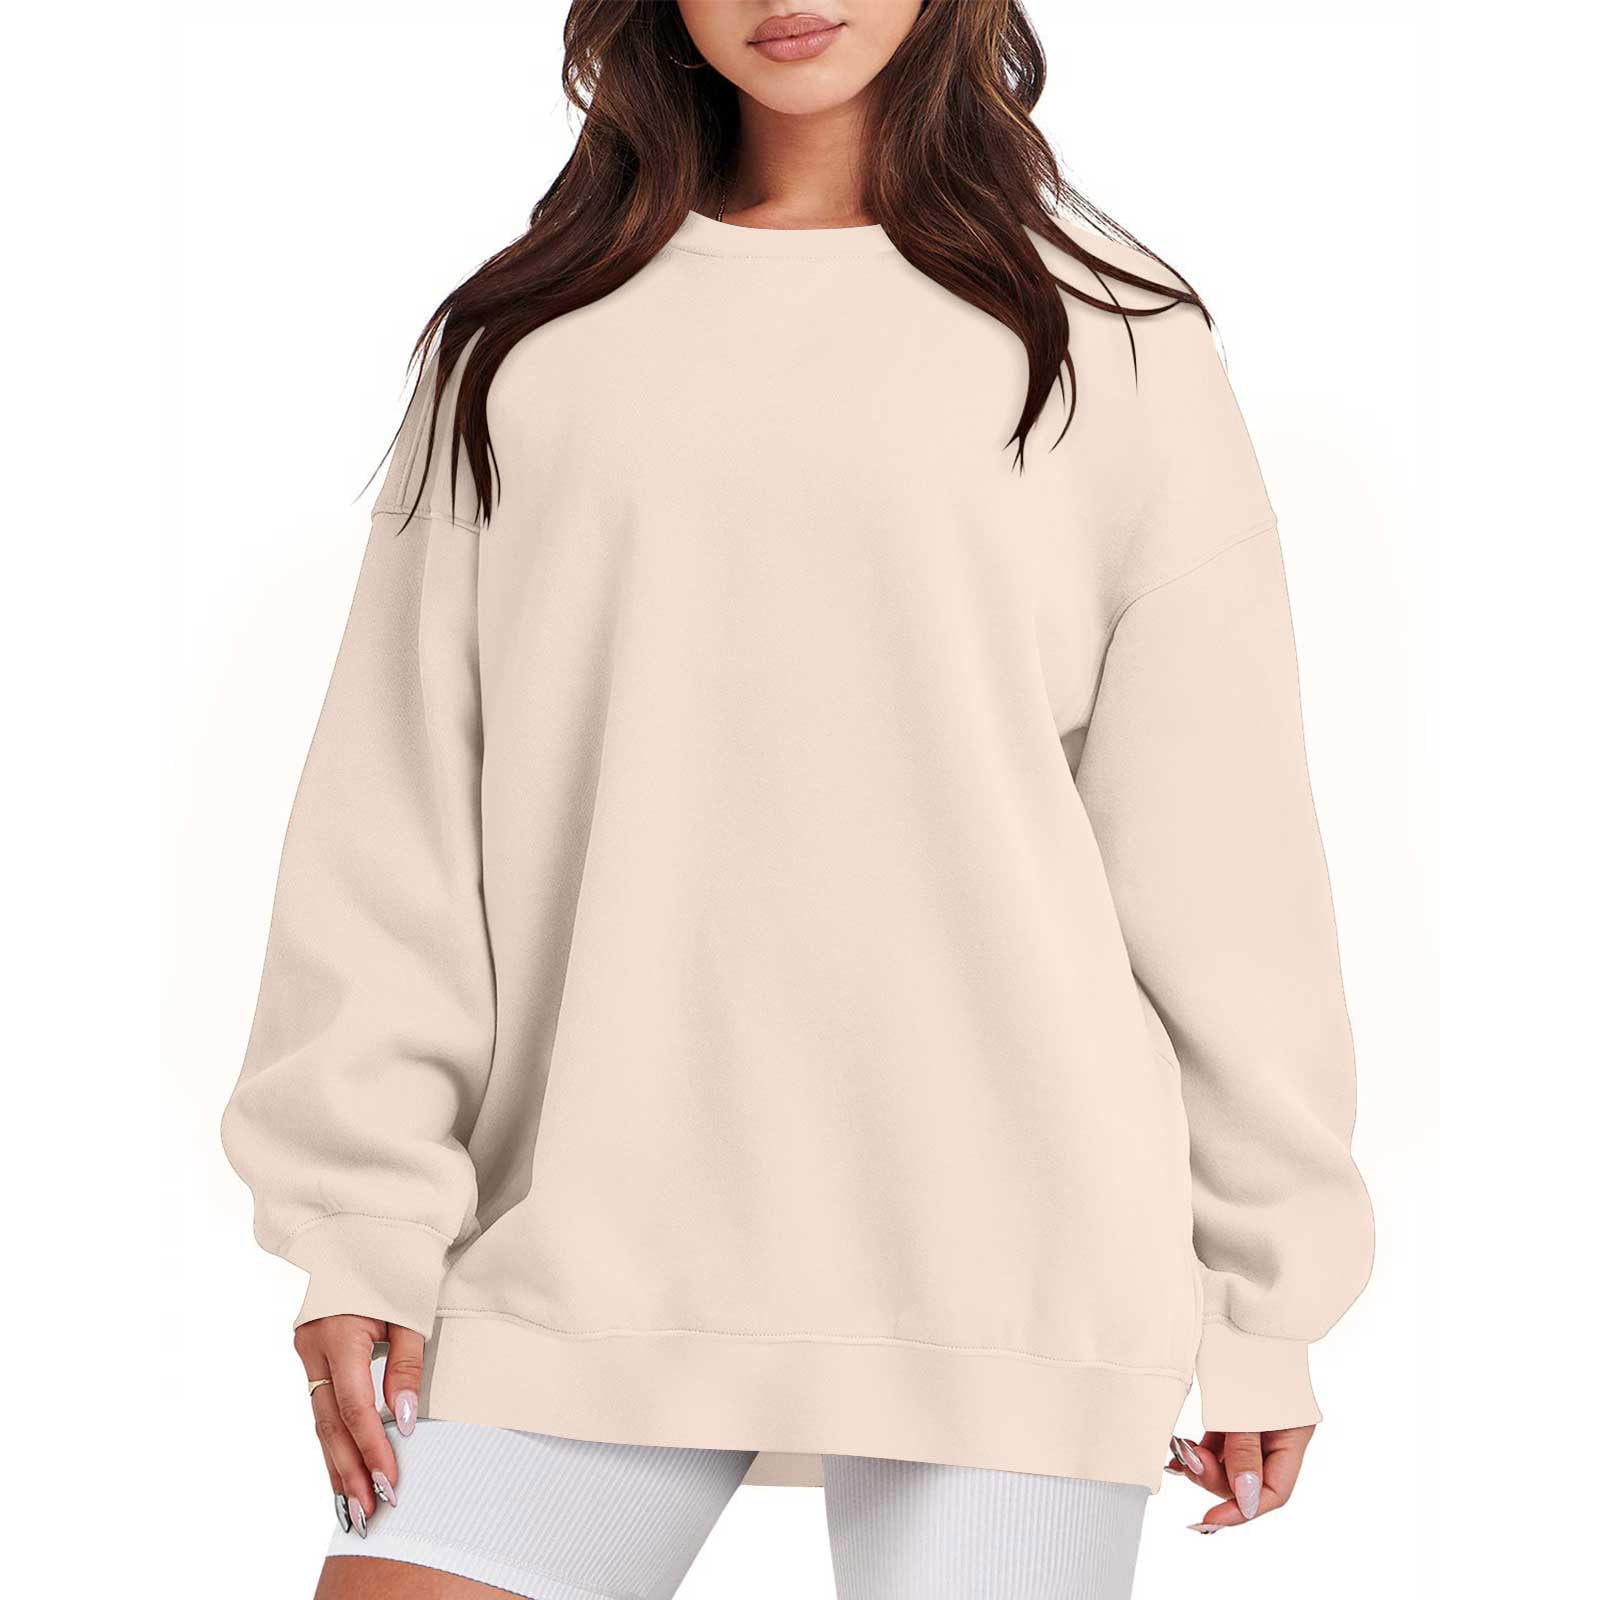 YYDGH Oversized Sweatshirt for Women Fleece Long Sleeve Crewneck Casual  Pullover Hoodie Tops Fall Y2K Trendy Clothes Light Blue S 